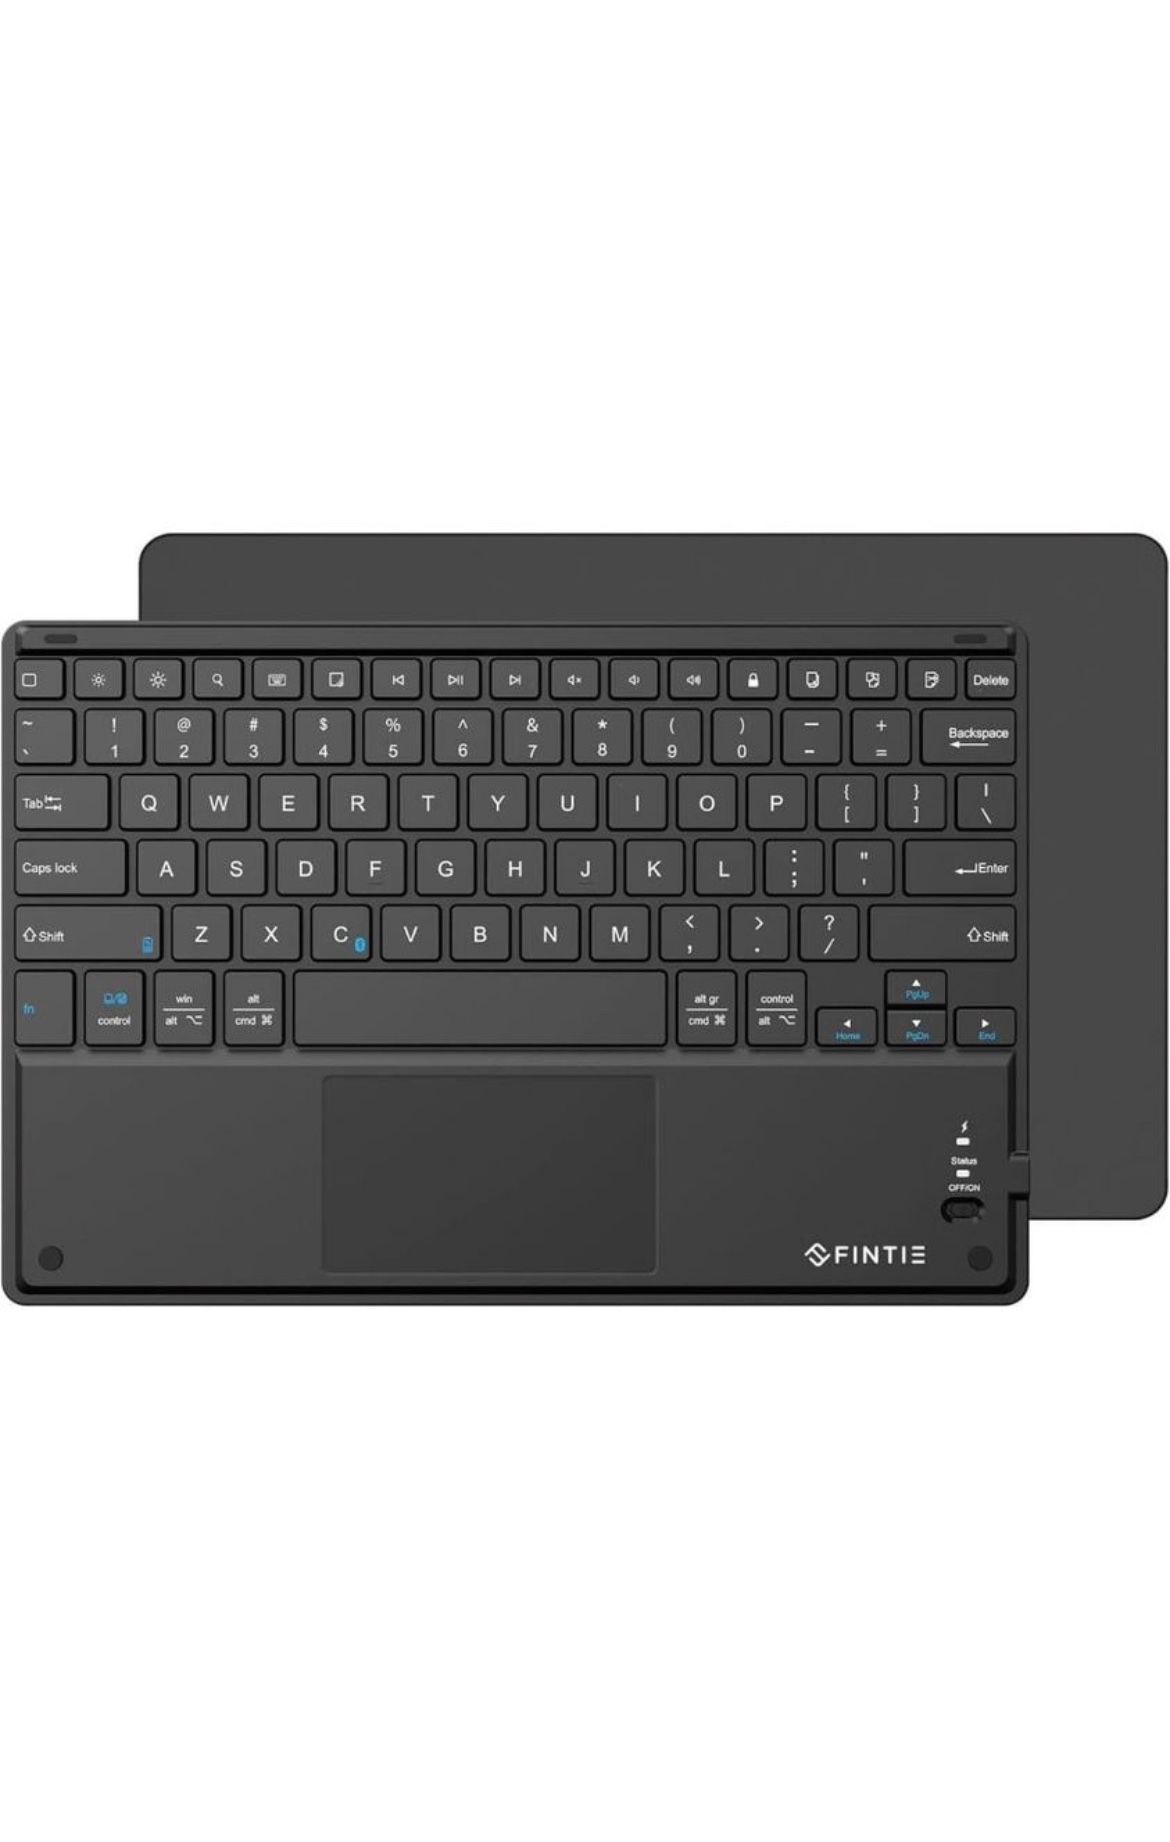 Fintie Ultrathin 4mm Wireless Bluetooth Keyboard with Built-in Multi-Touch Touchpad for iPad, iPhone